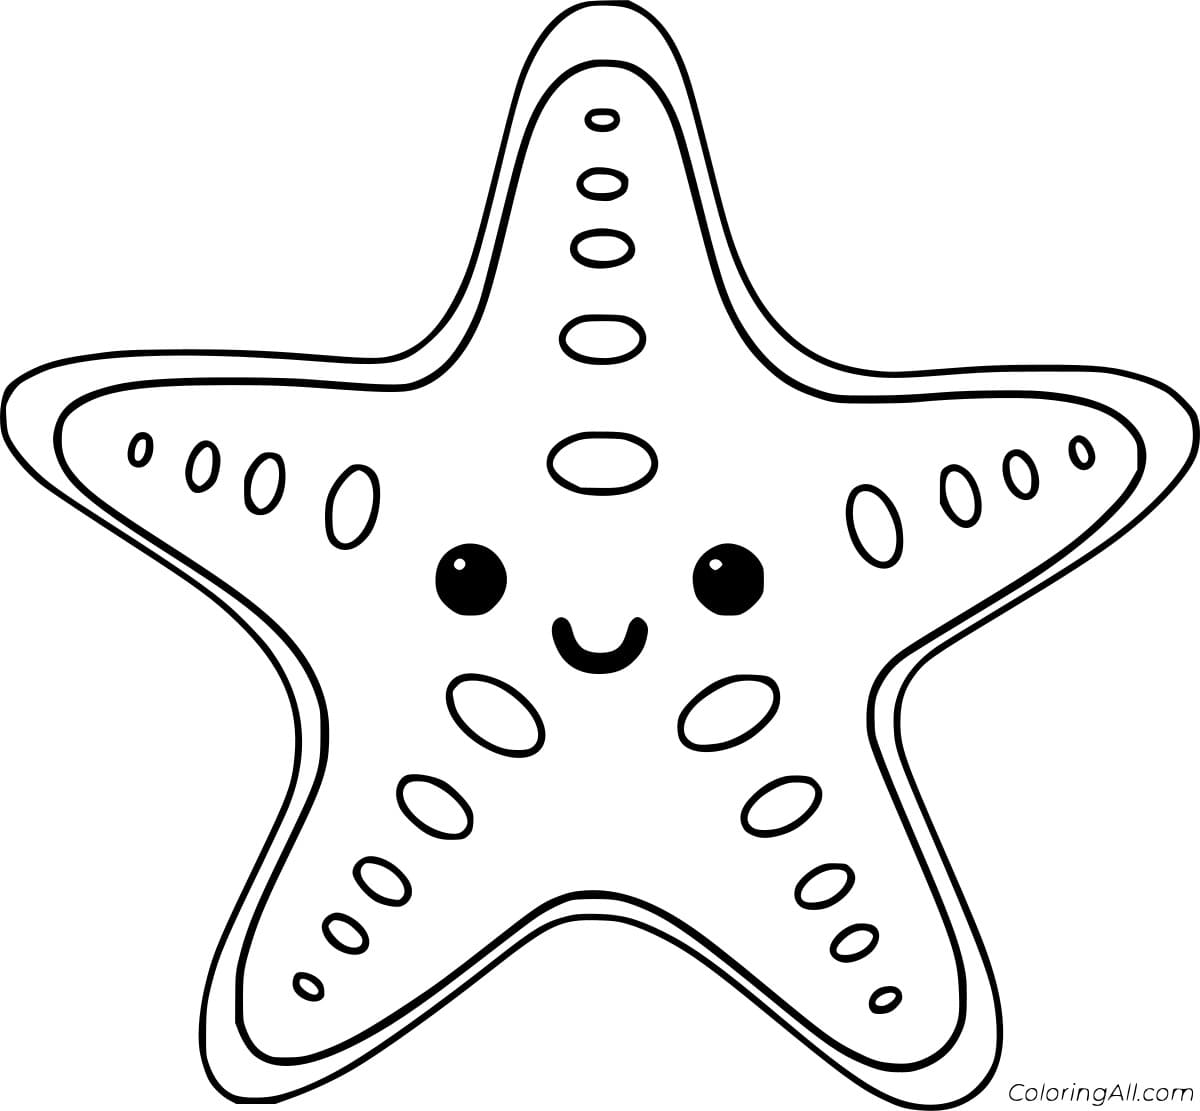 Simple Cute Starfish Image Coloring Page